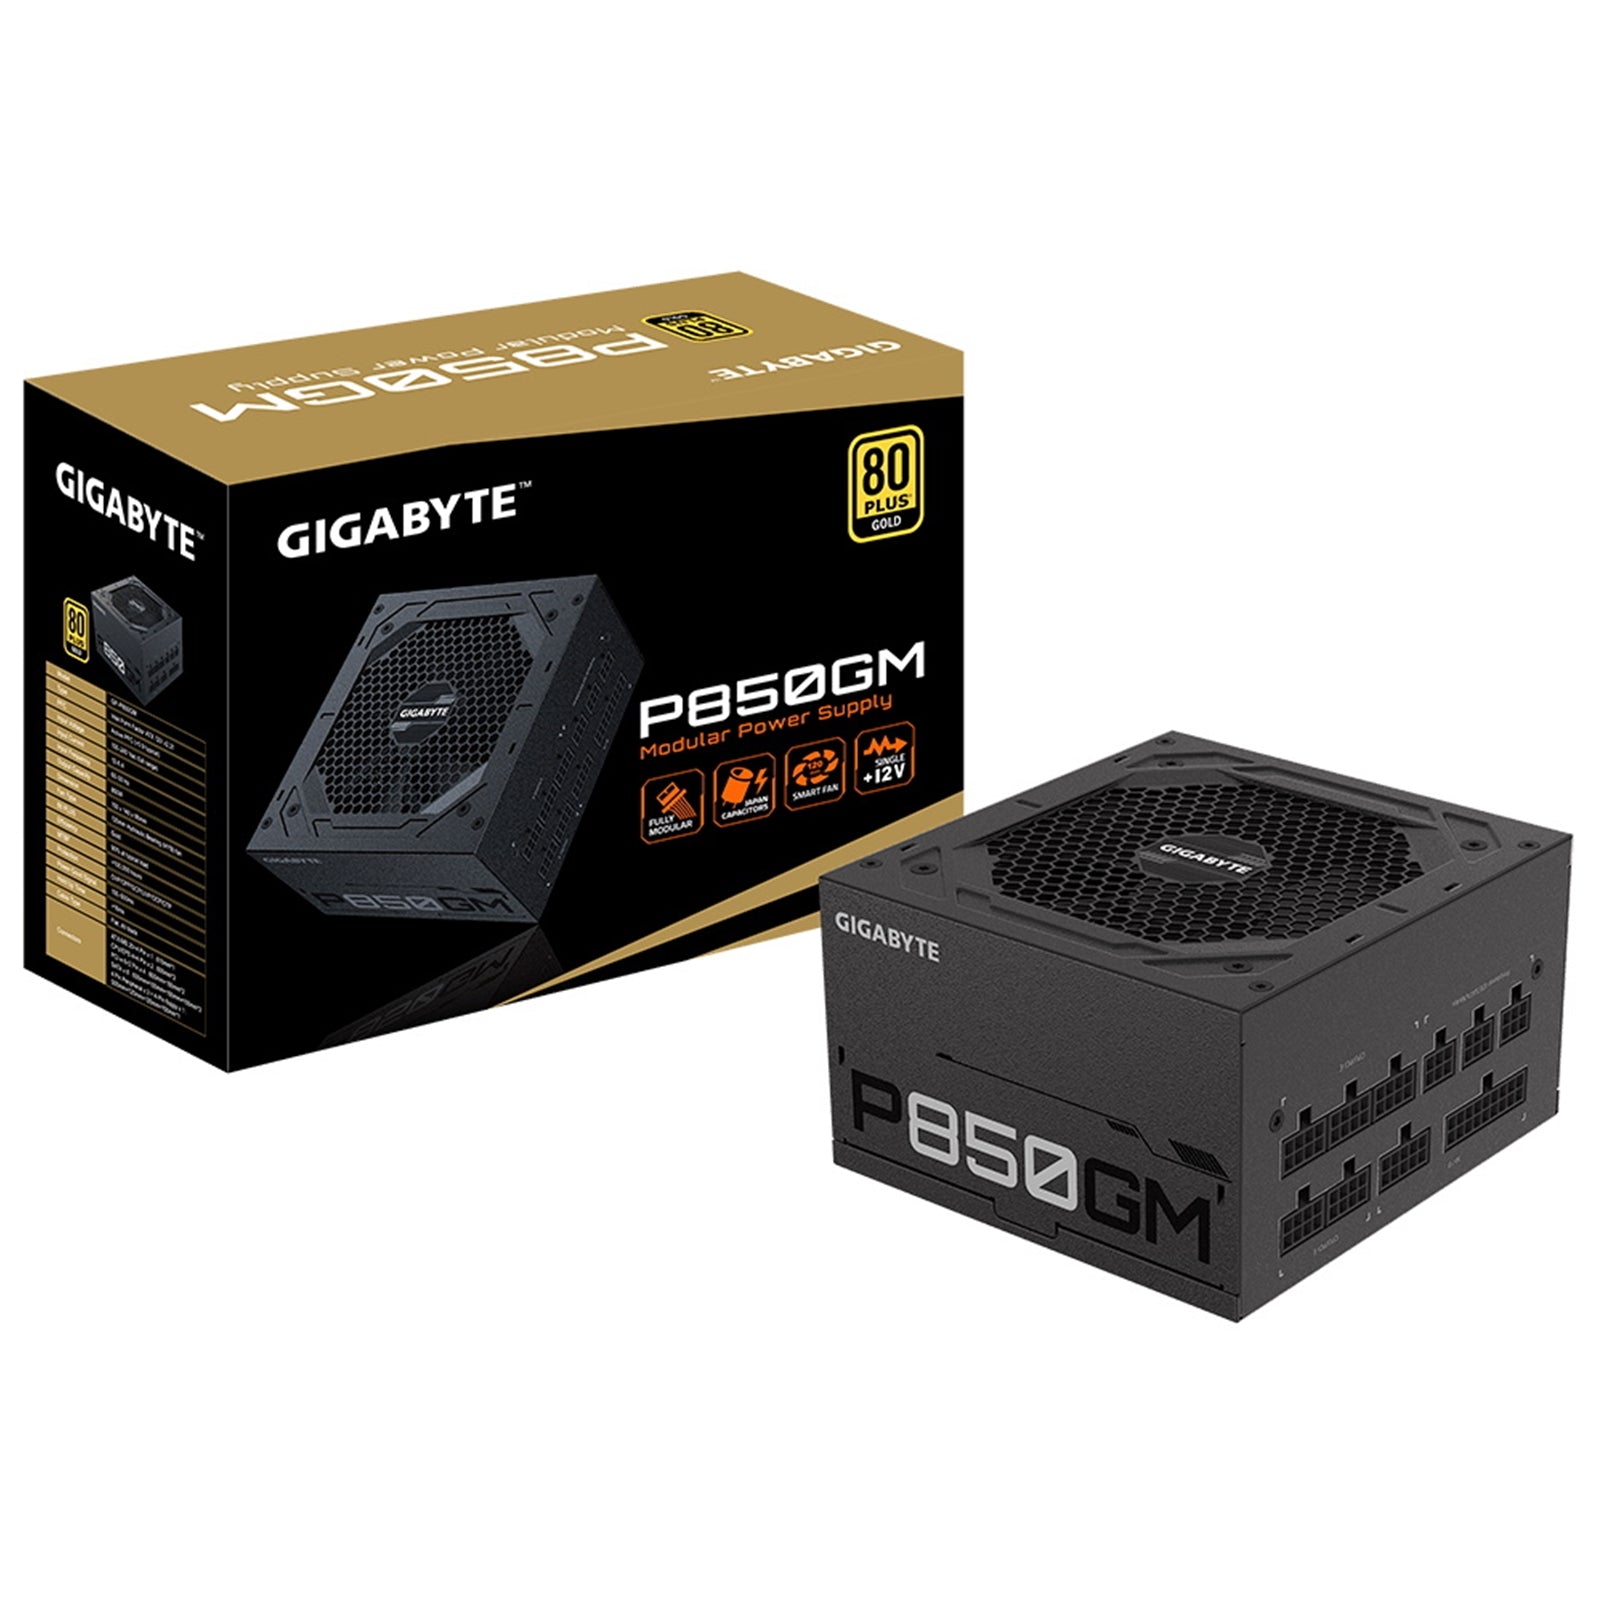 GIGABYTE Gold 850W PSU Modular, Efficient & Quiet Power Supply with Japanese Capacitors